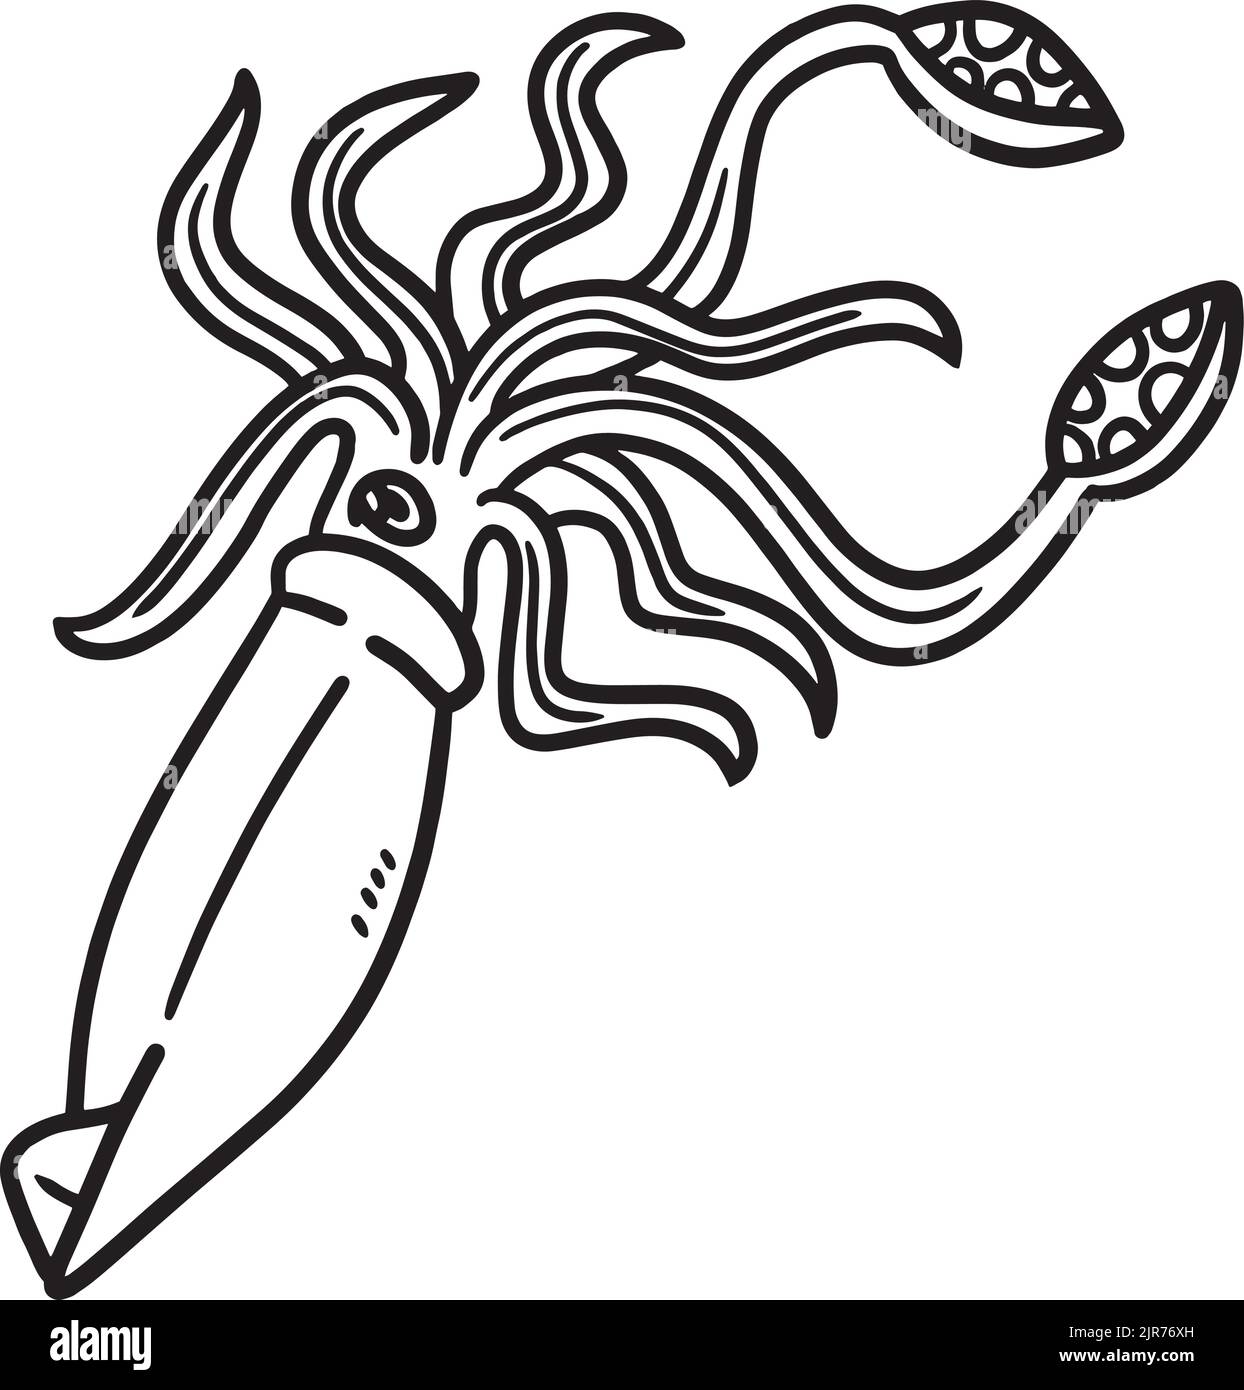 Giant Squid Coloring Page for Kids Stock Vector